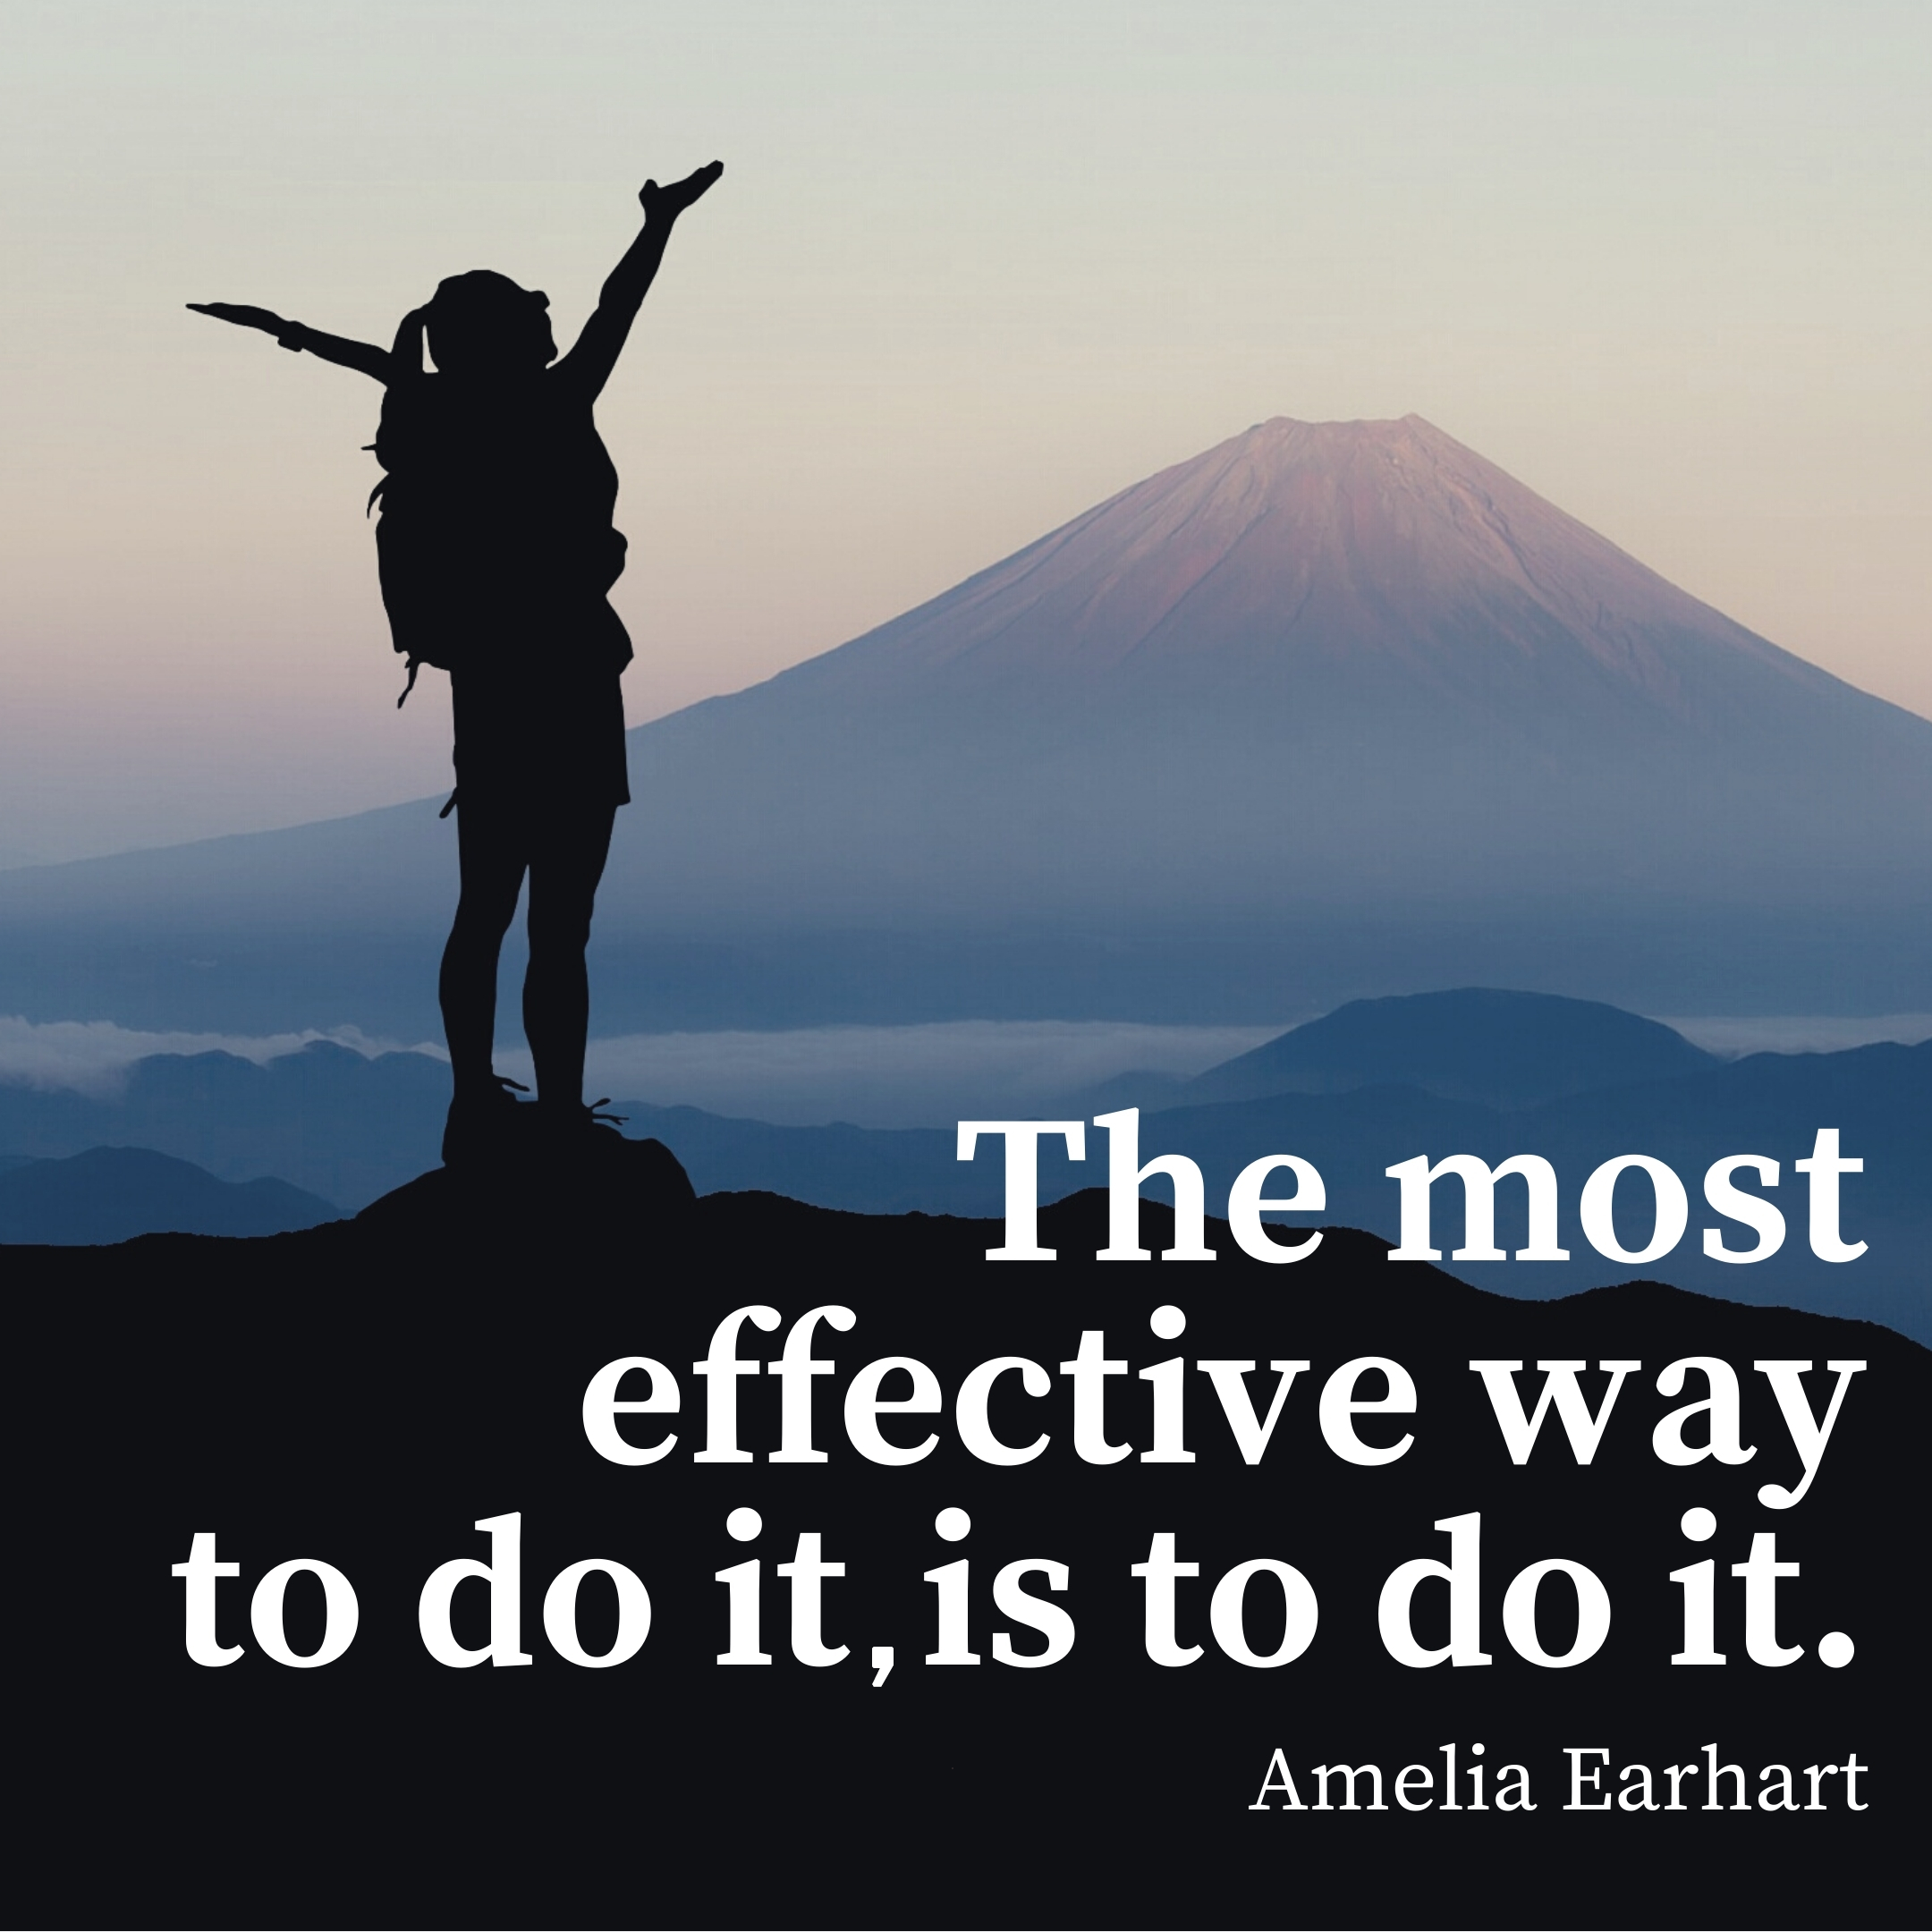 Amelia Earhart | Monday Motivation Quotes